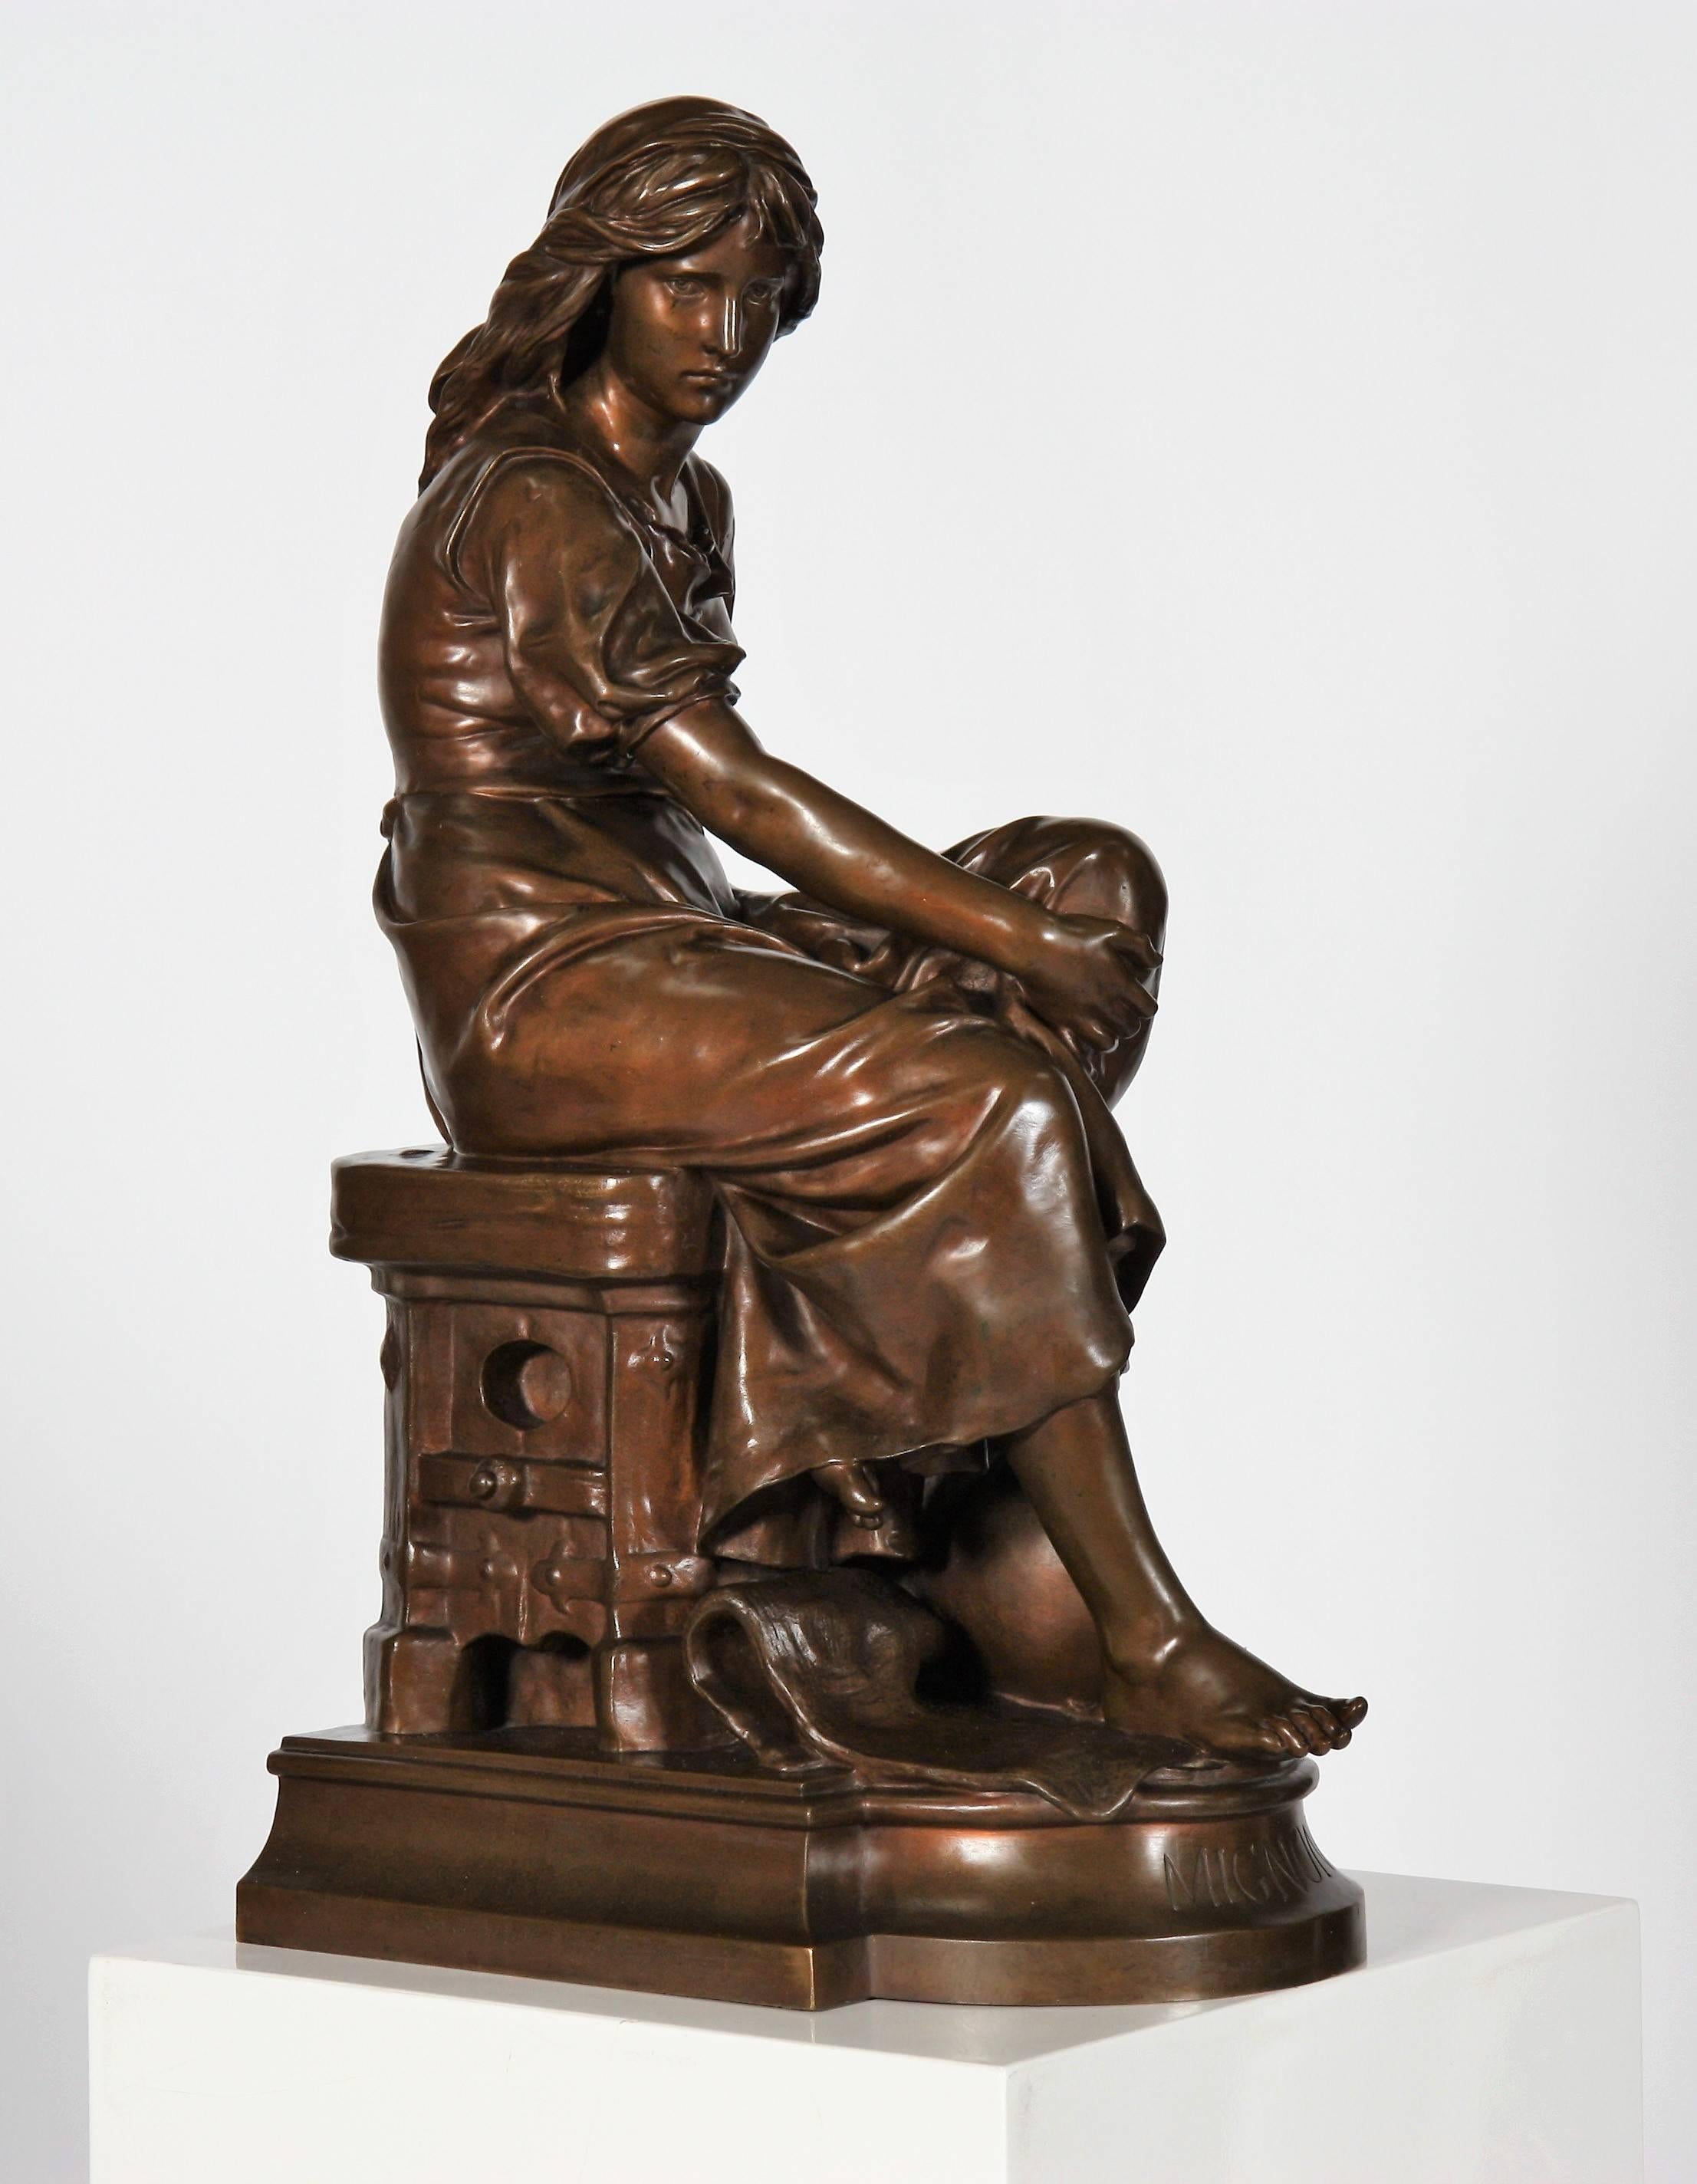 Representing a seated peasant woman. Terrace bearing the signature of Aizelin and Barbedienne, foundry in Paris.

Eugène-Antoine Aizelin, born July 8, 1821 in Paris and died March 4, 1902, is a French sculptor and statuary. Eugène Aizelin is the